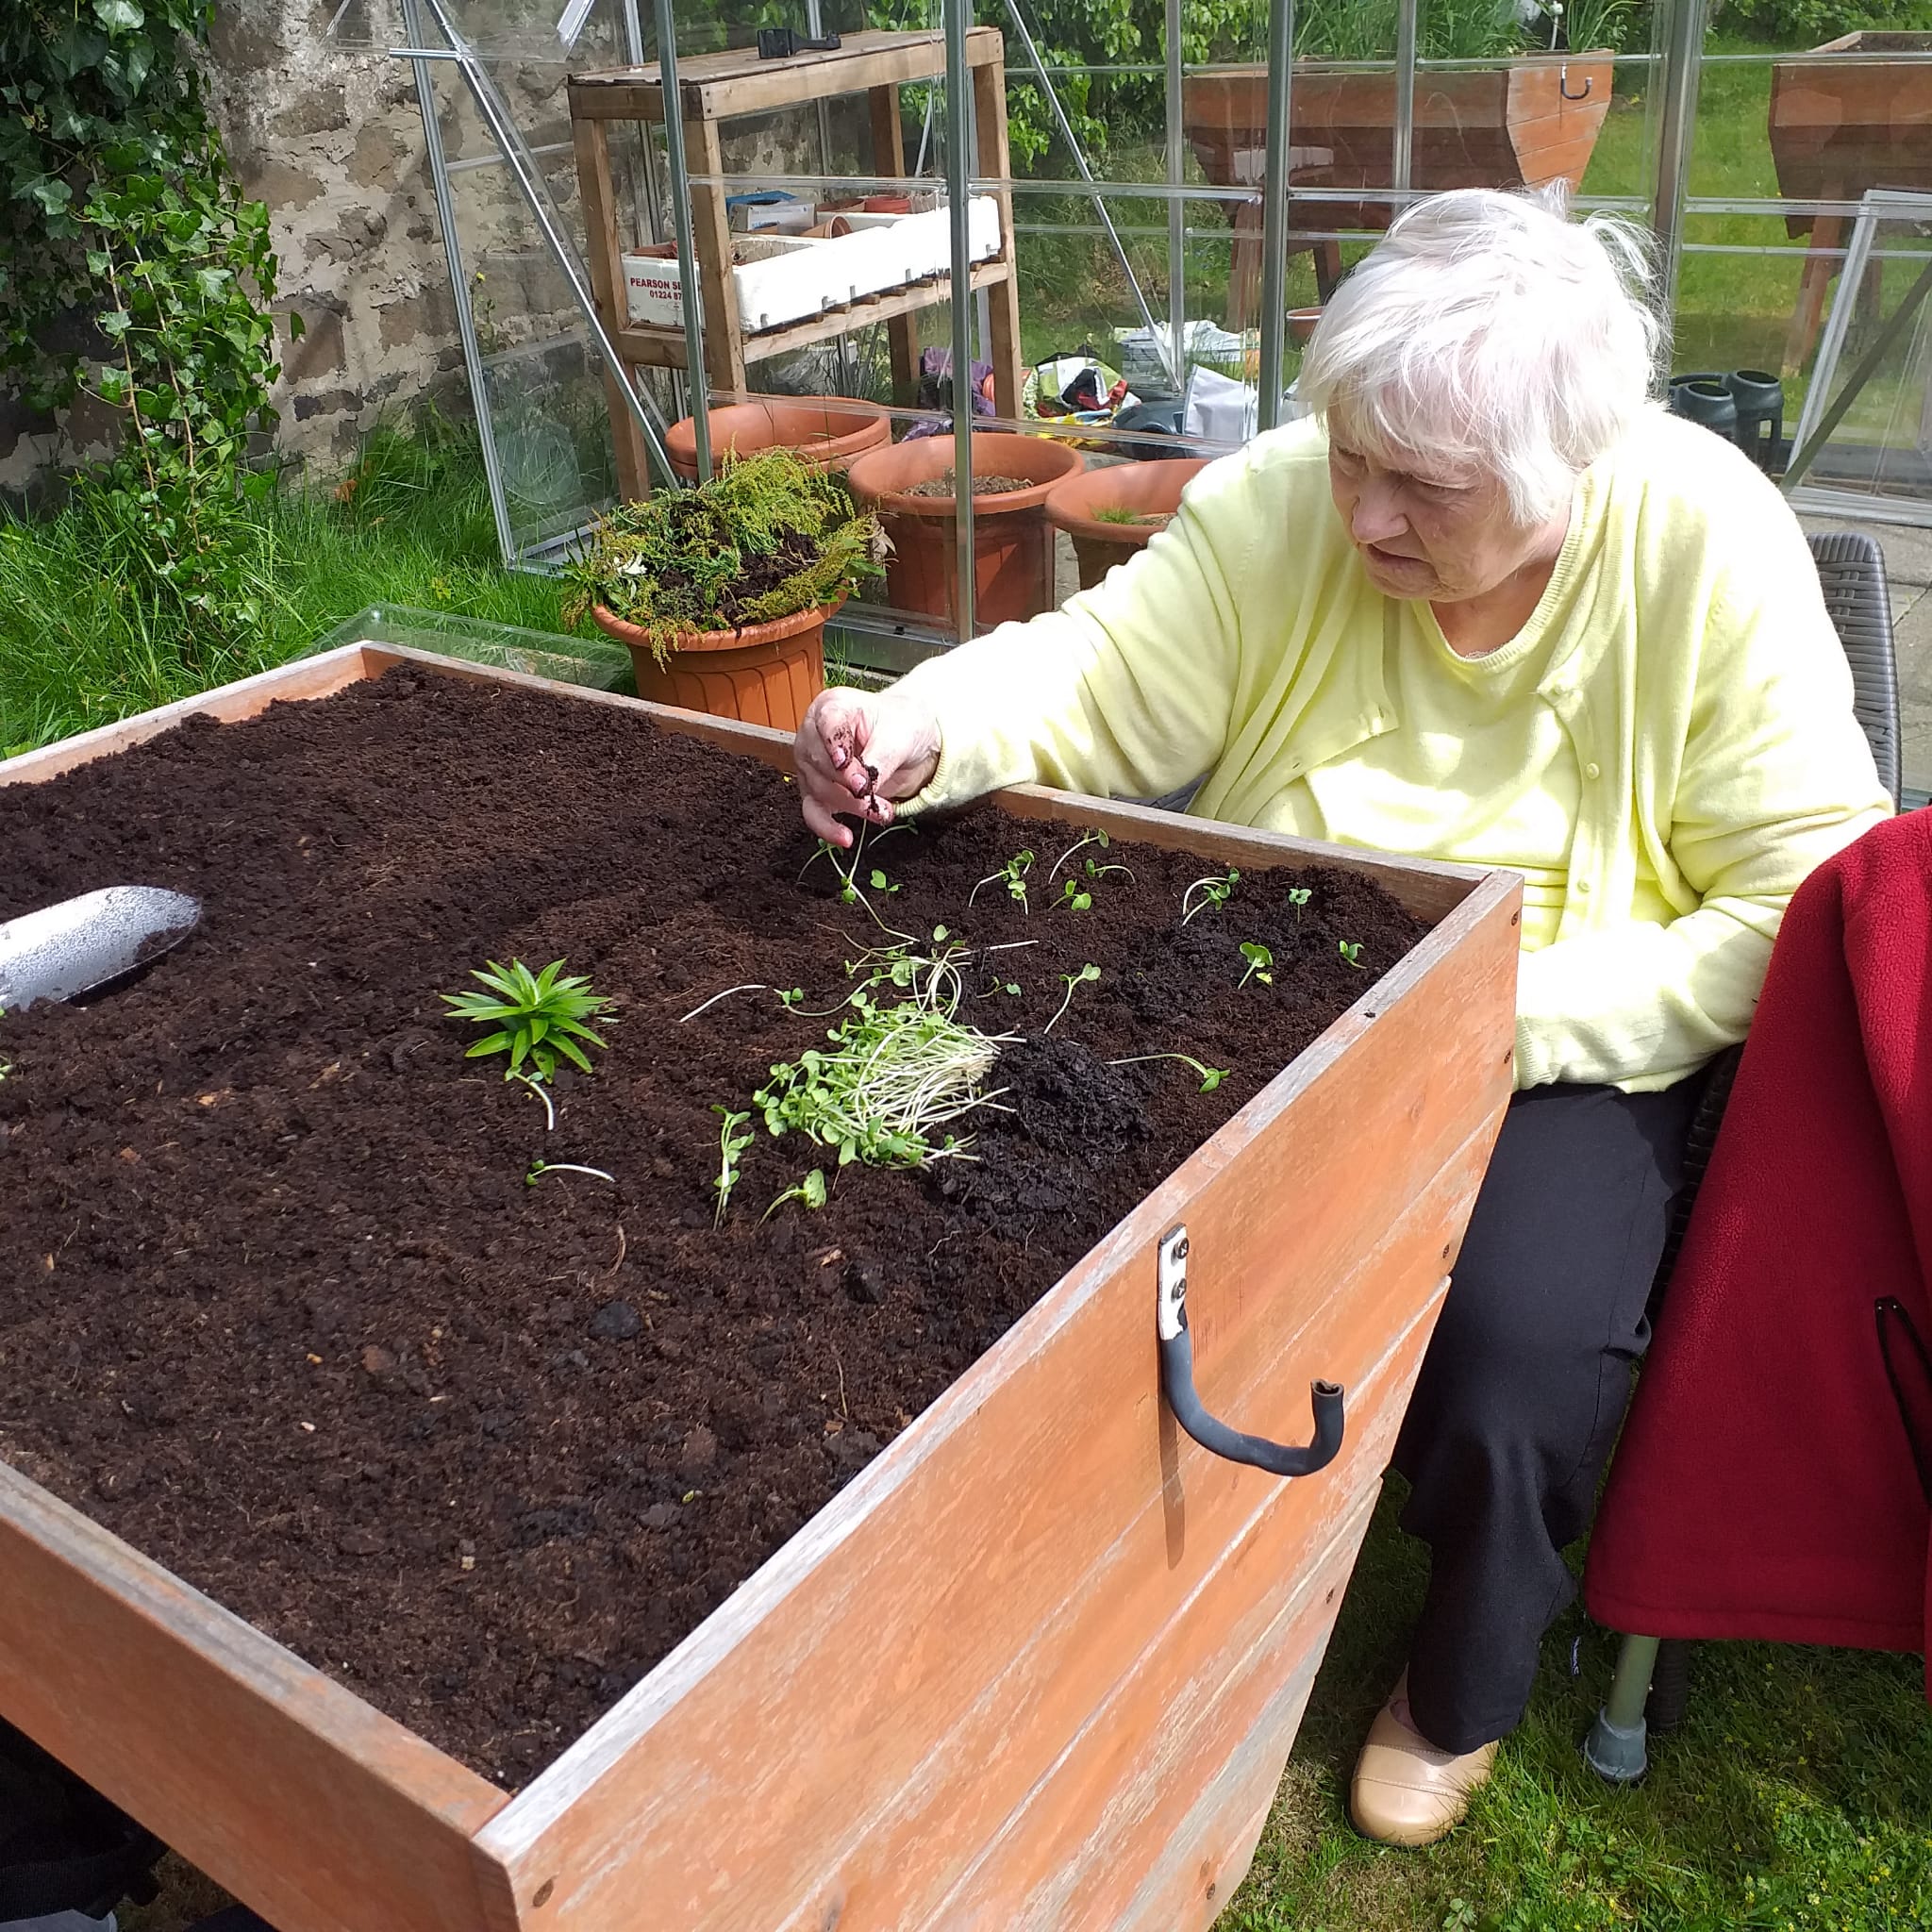 Residents Helping to Plant Herbs